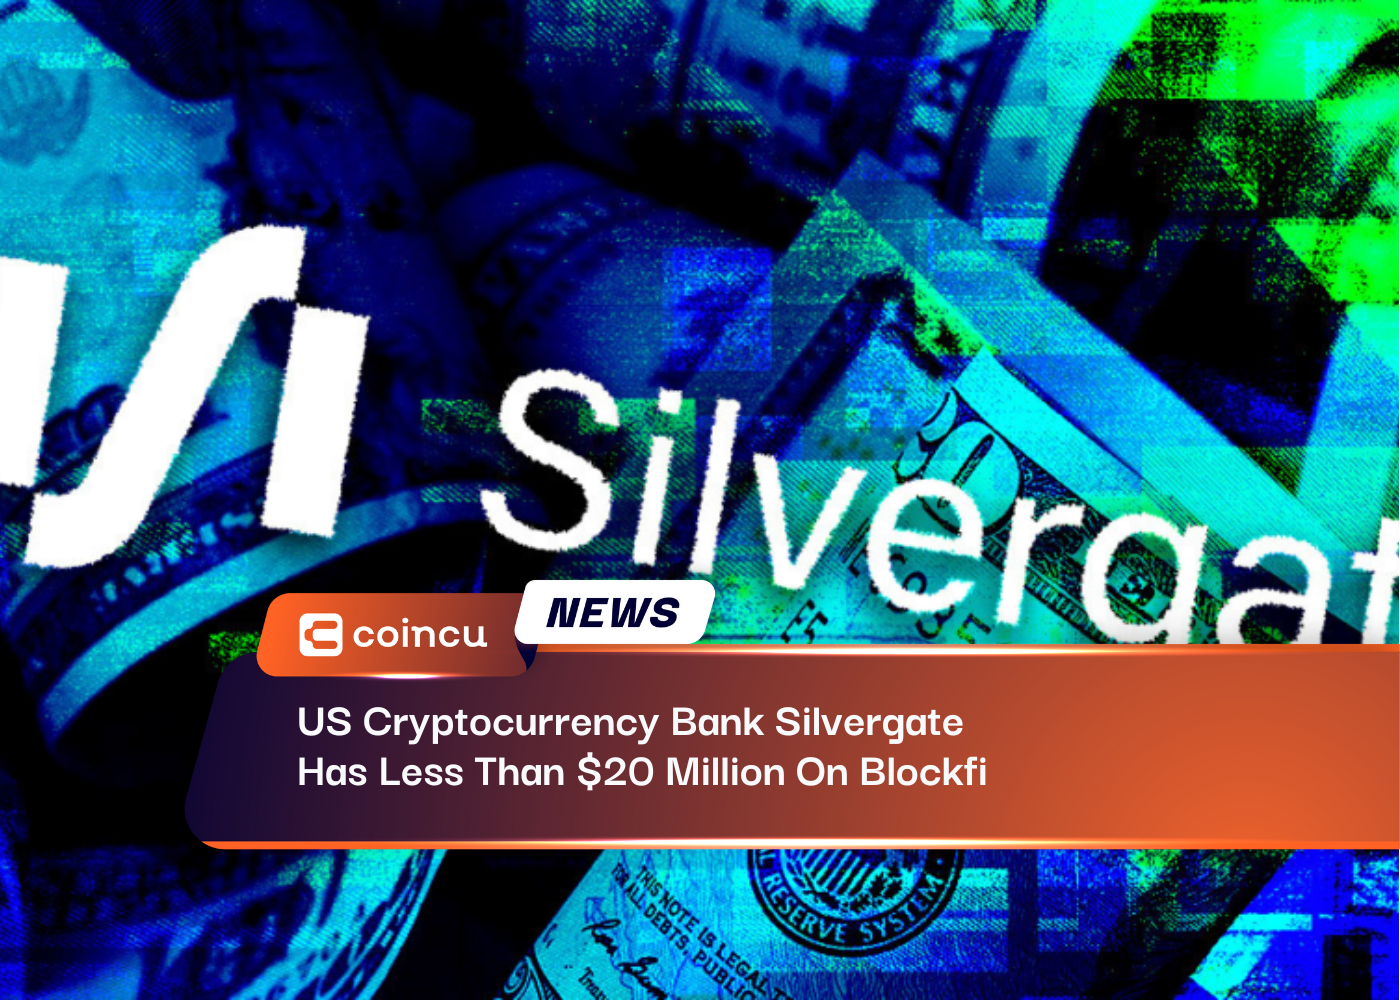 US Cryptocurrency Bank Silvergate Has Less Than $20 Million On Blockfi